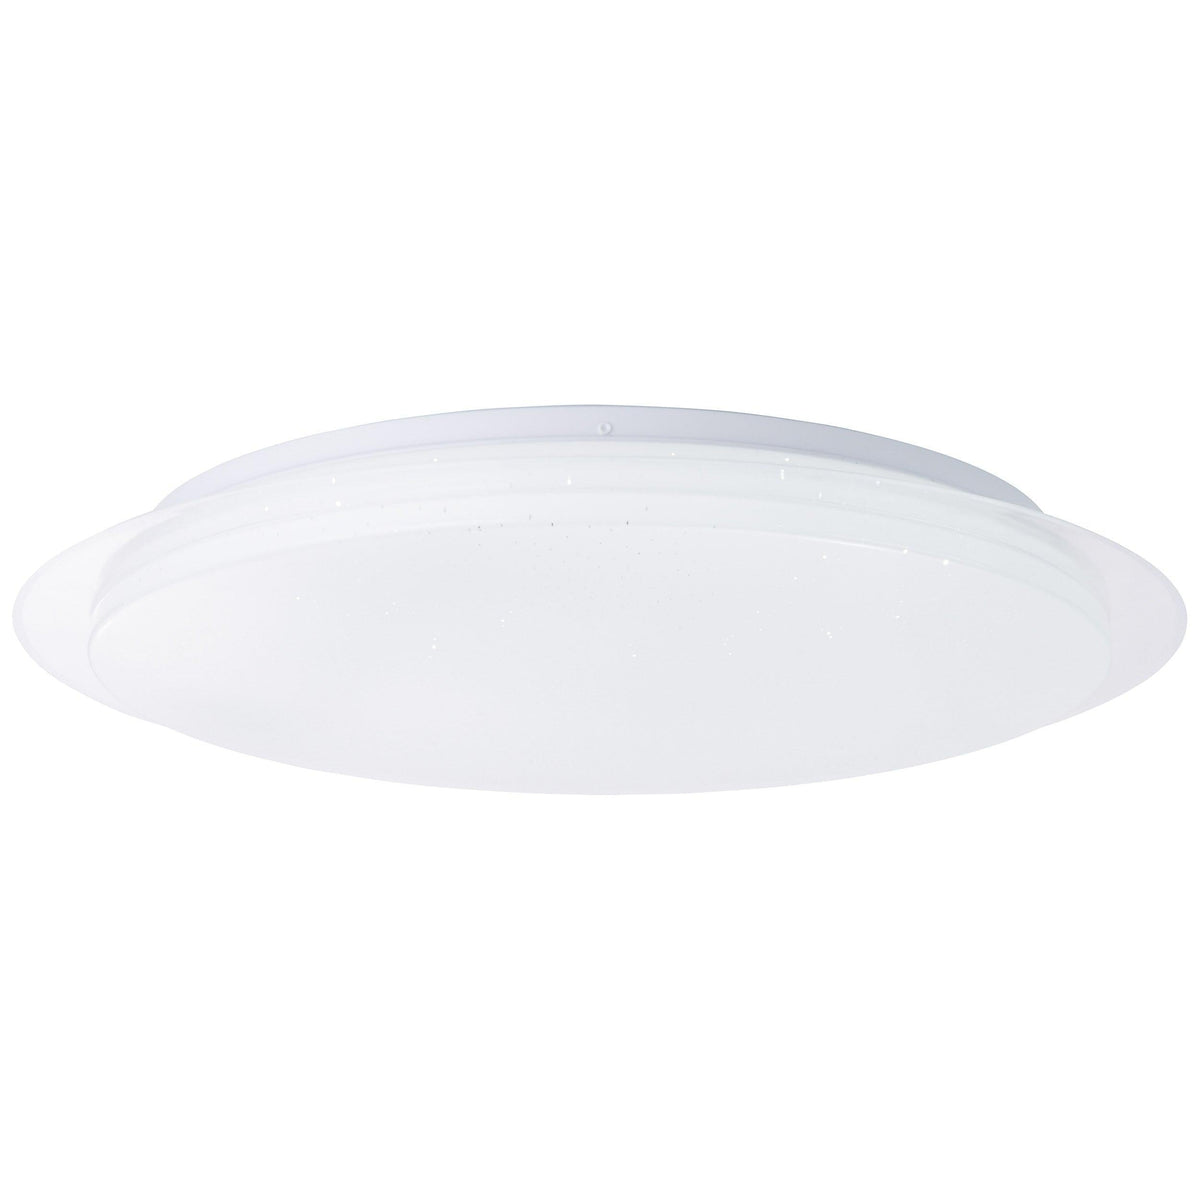 Brilliant 1 Light 60W Vittoria LED Wall and Ceiling Light - White | G96934A05 from DID Electrical - guaranteed Irish, guaranteed quality service. (6977609793724)